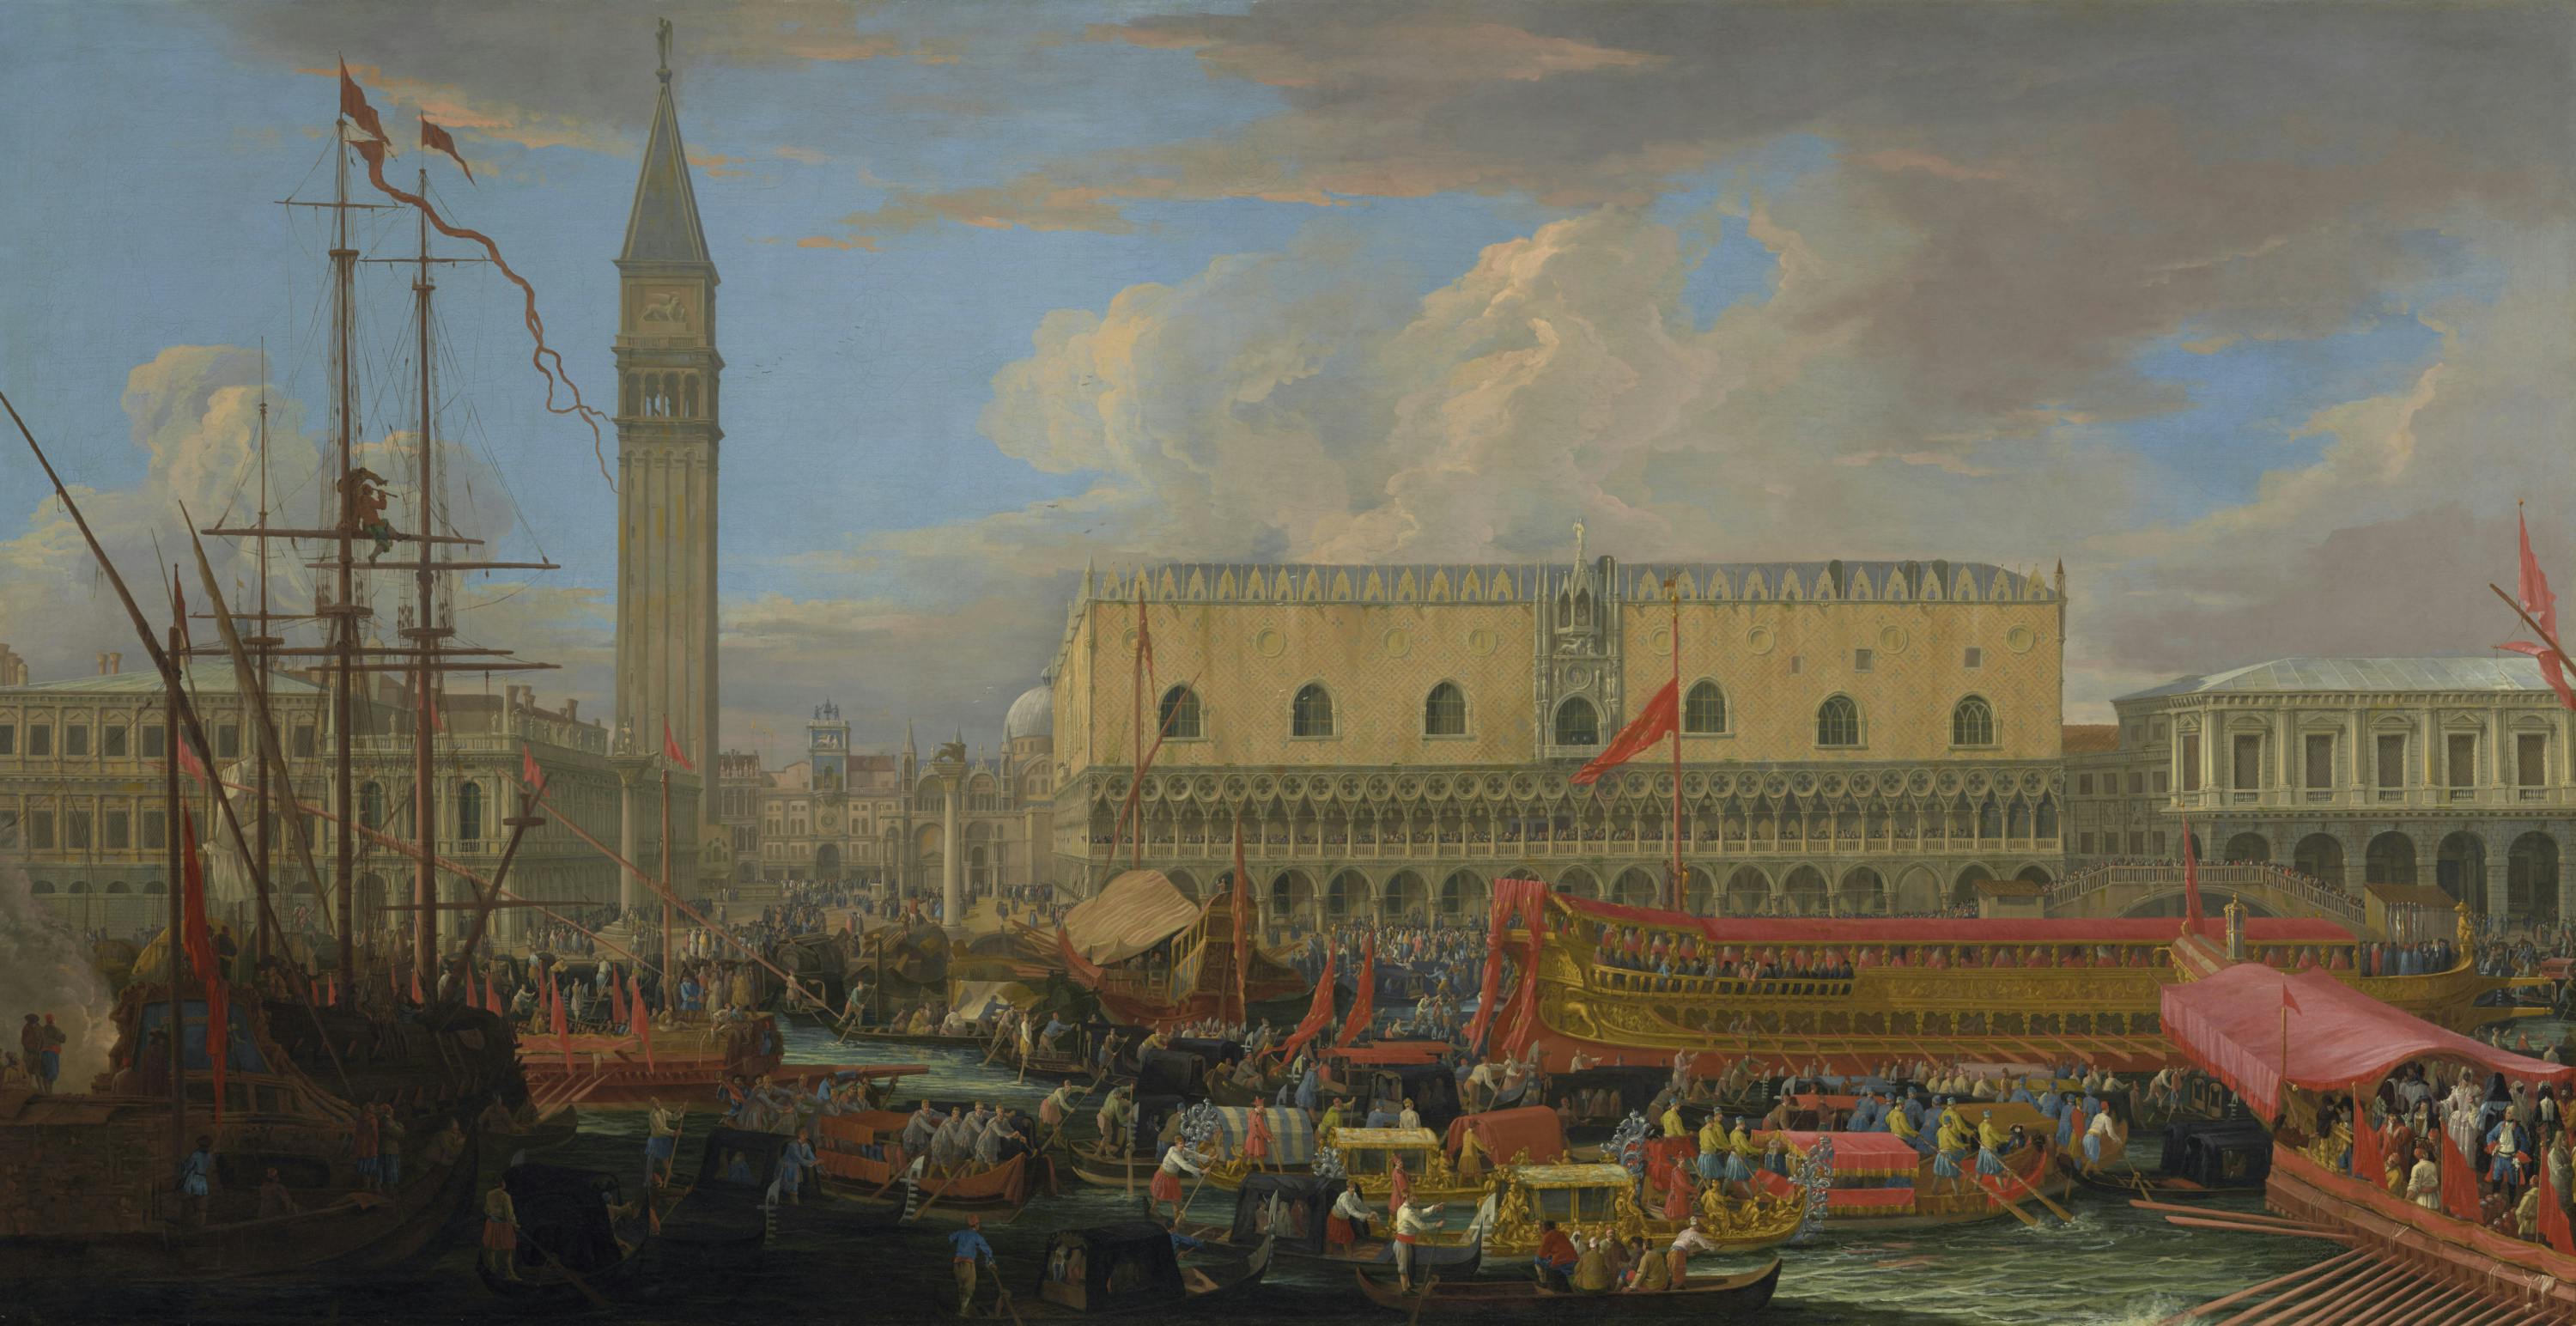 Painting of Venice